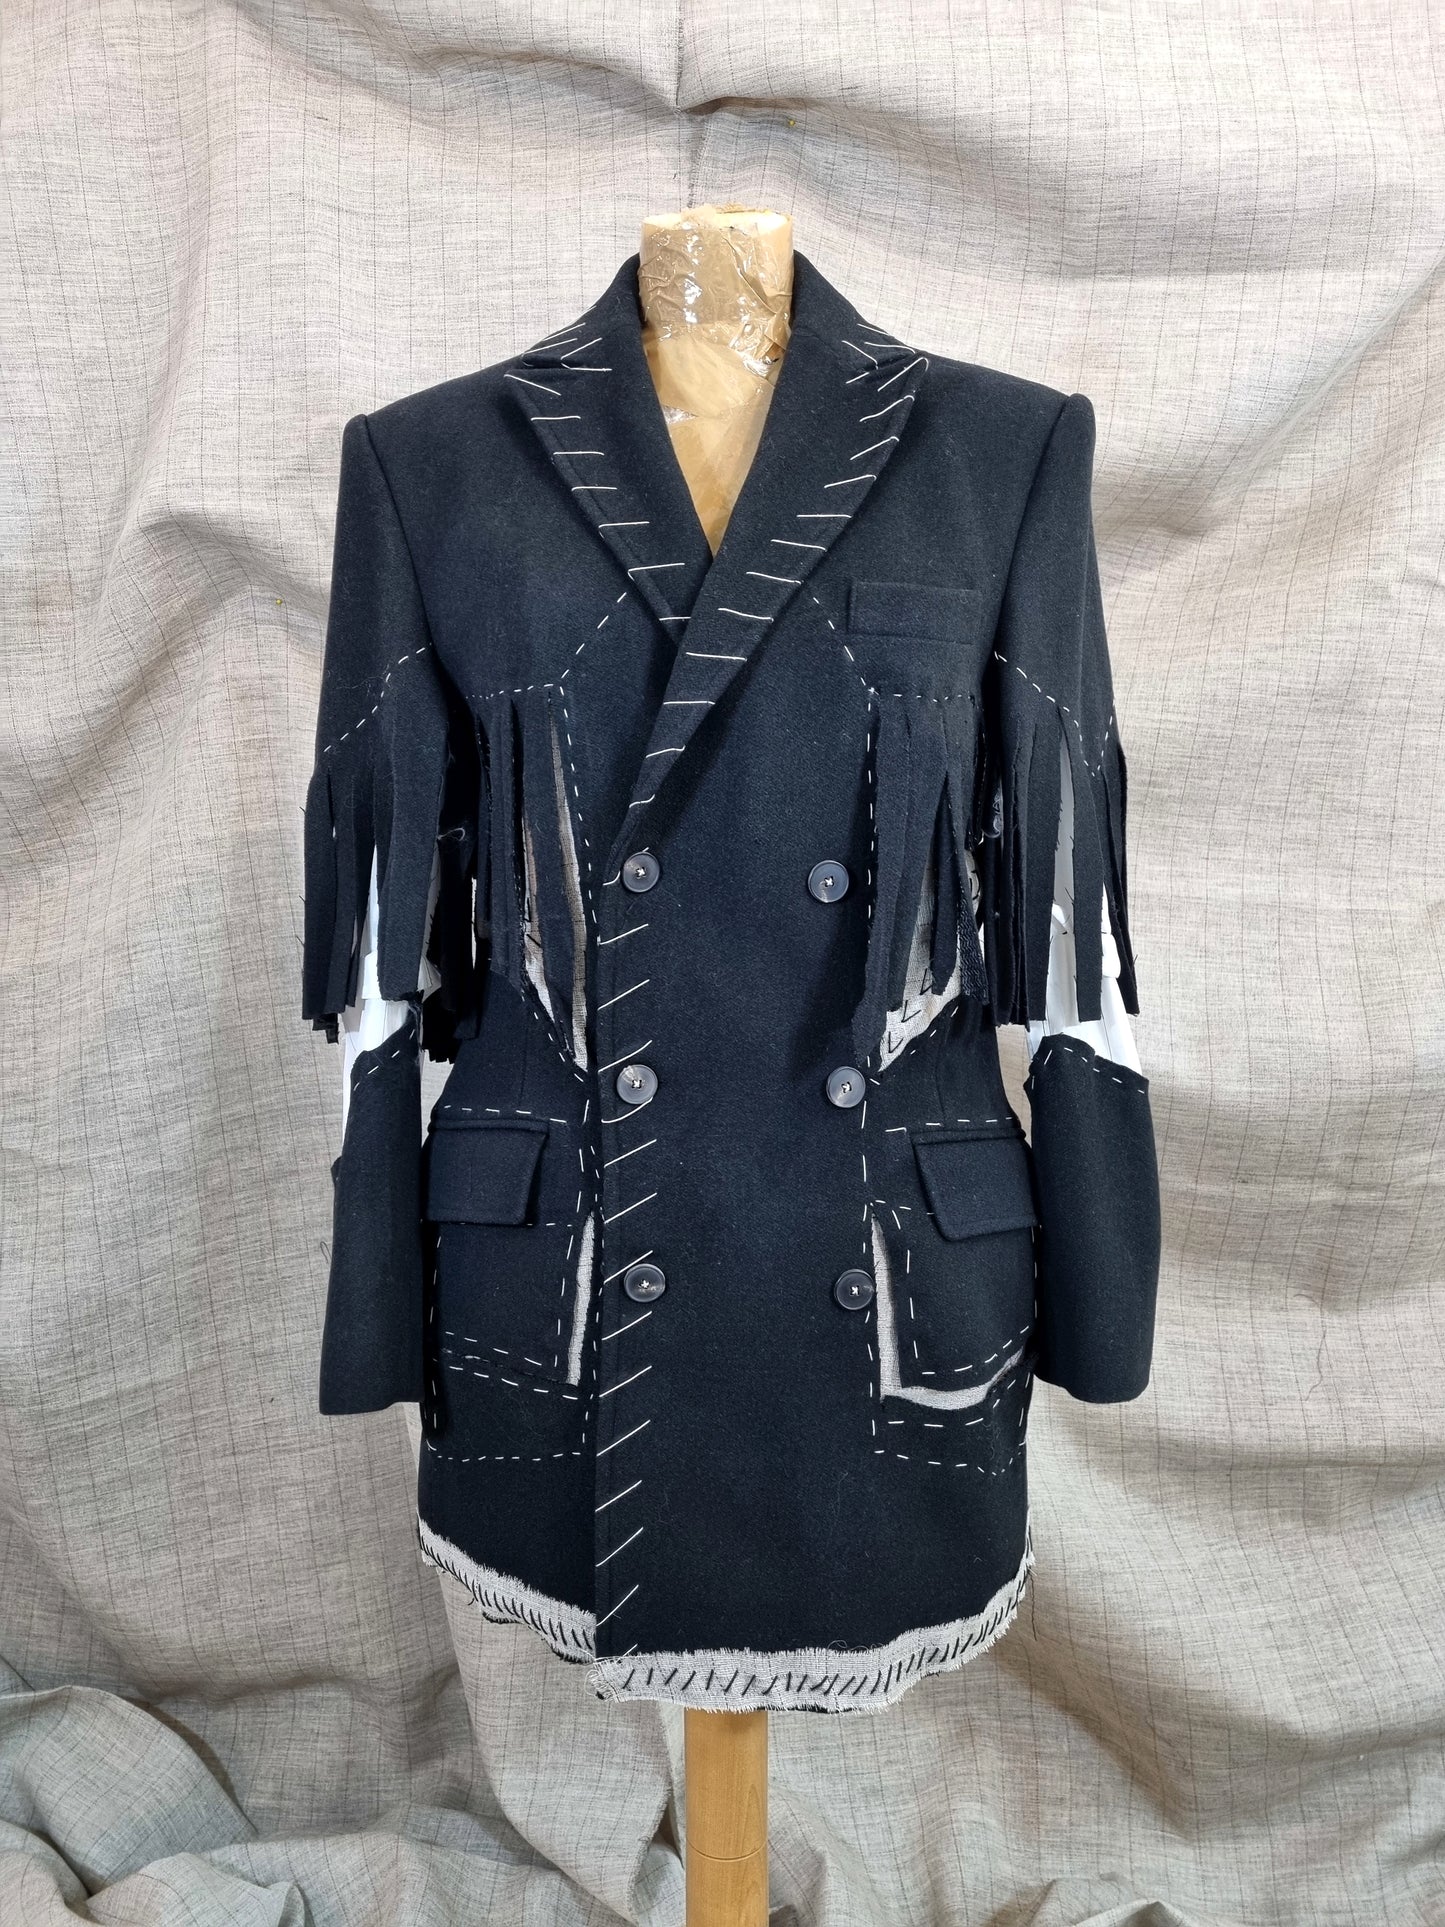 Double-Breasted Cut-Out Jacket With Handmade Decorative Stitching